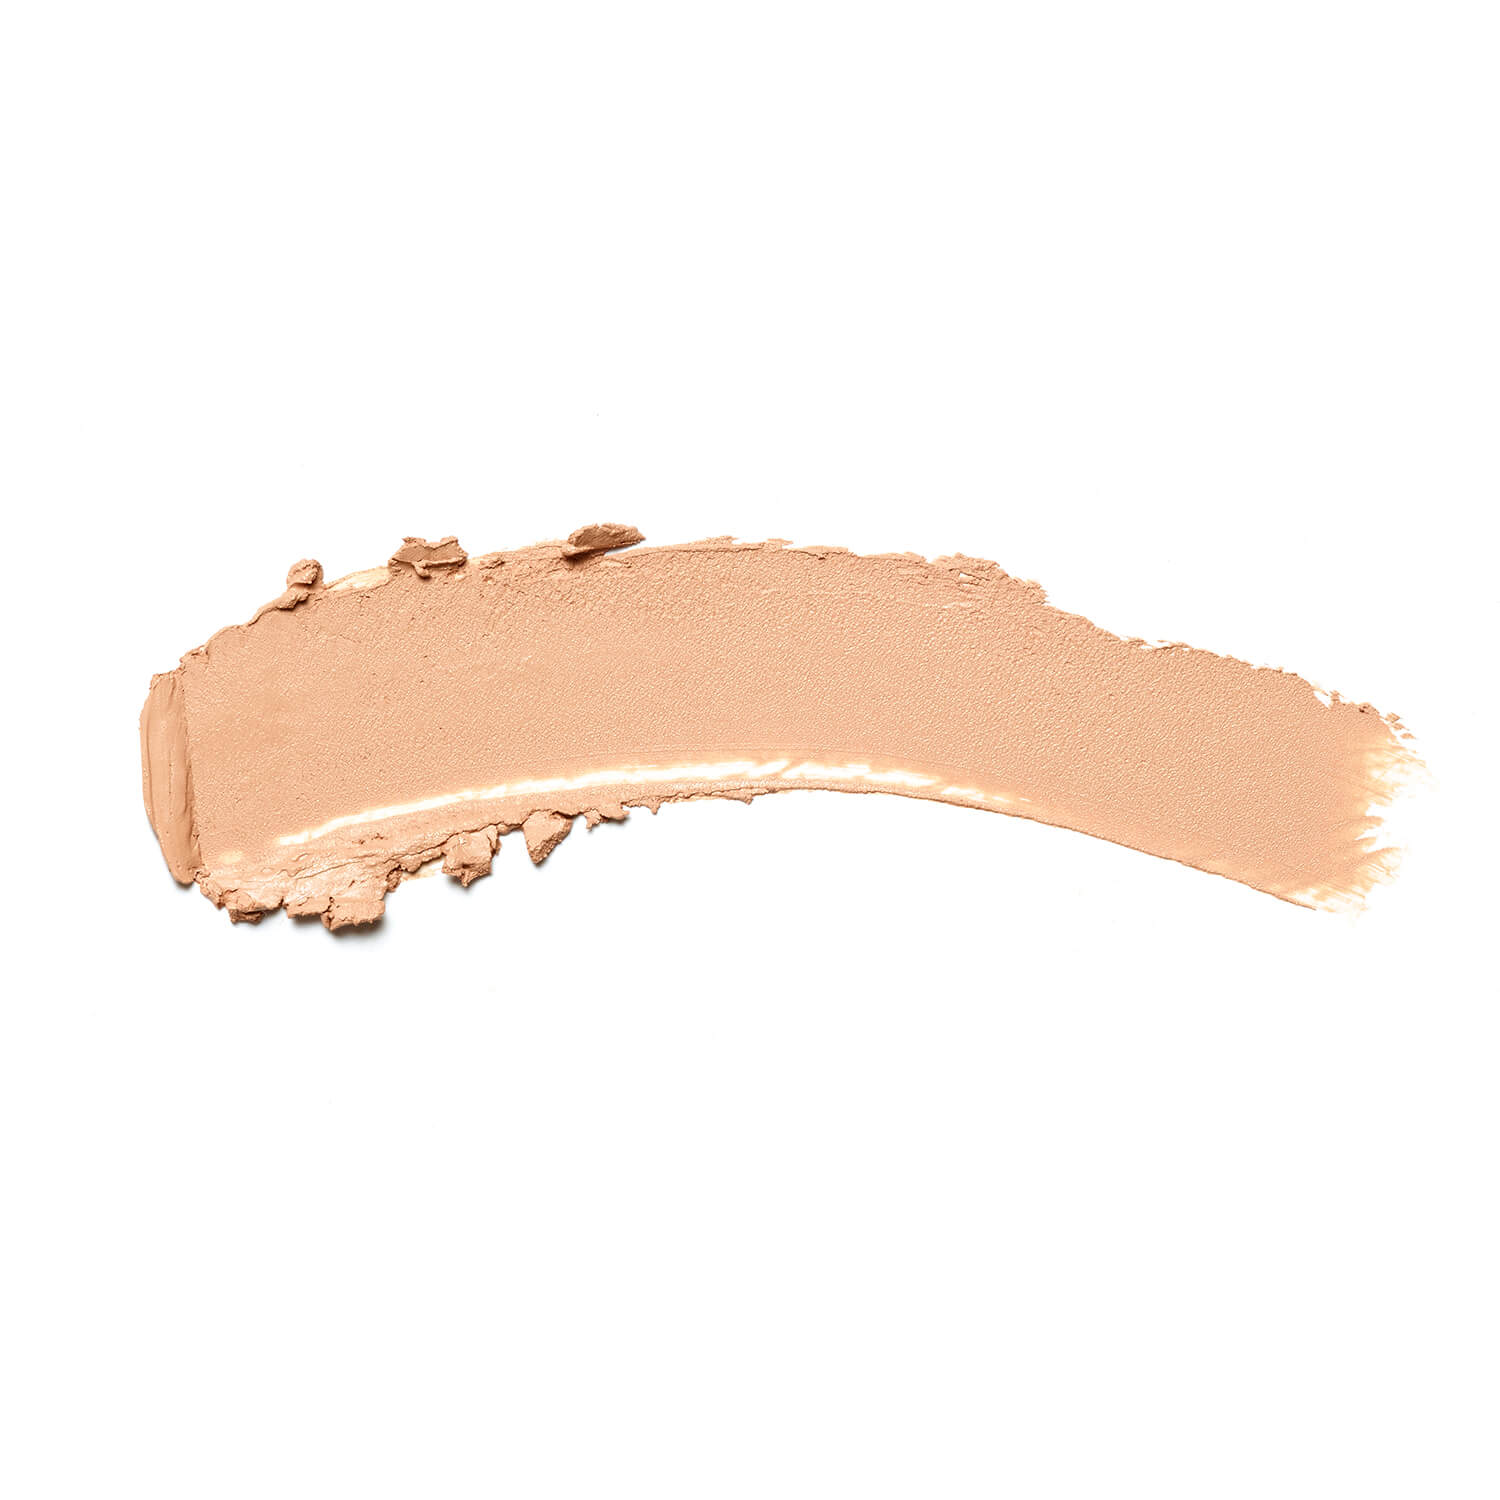 THE FULL CONCEALER (CORRECTOR)